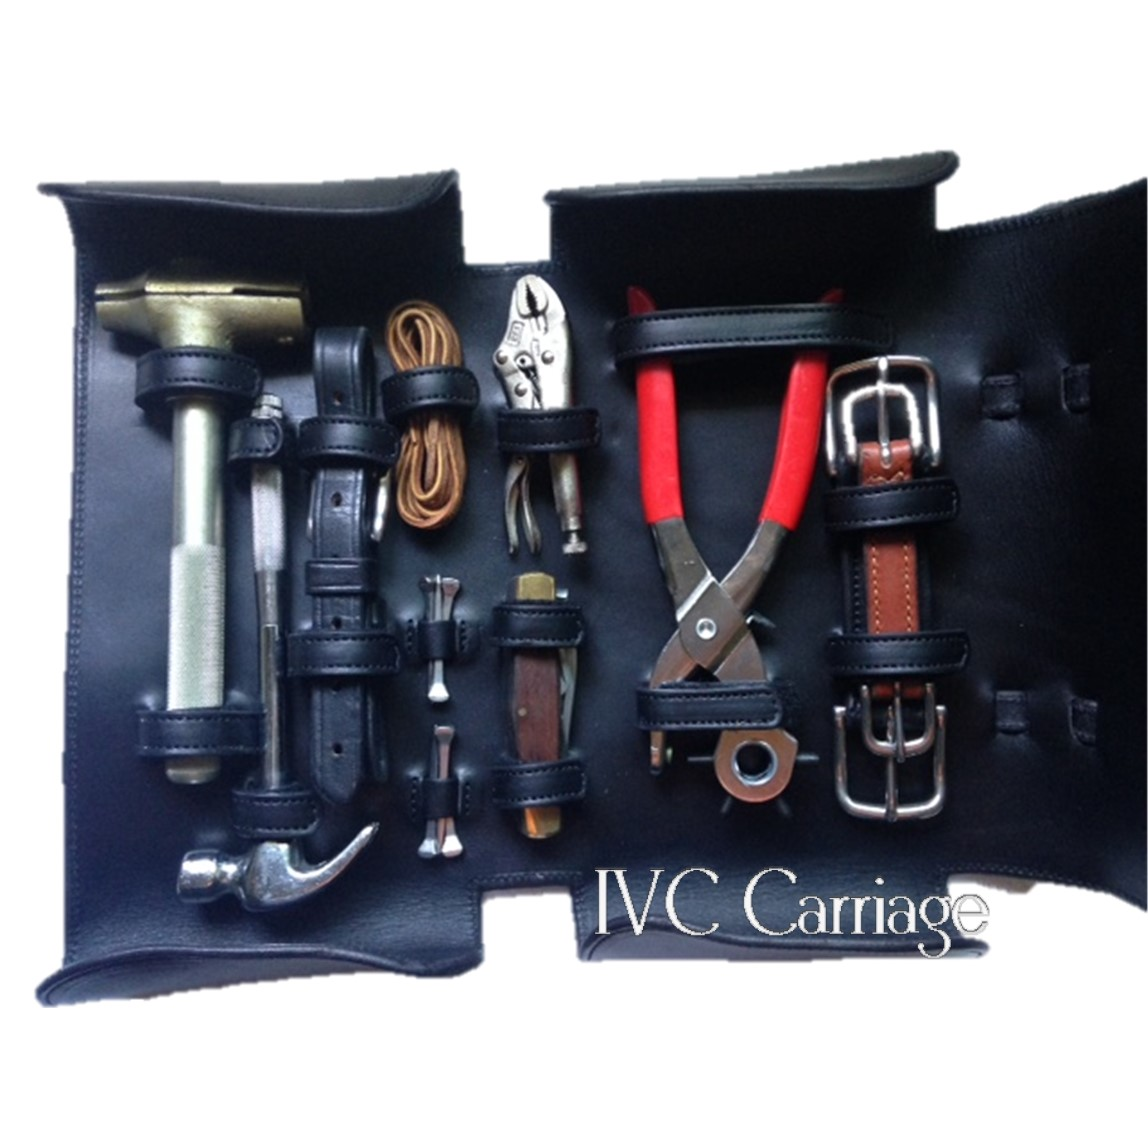 Carriage Spares Kit | IVC Carriage